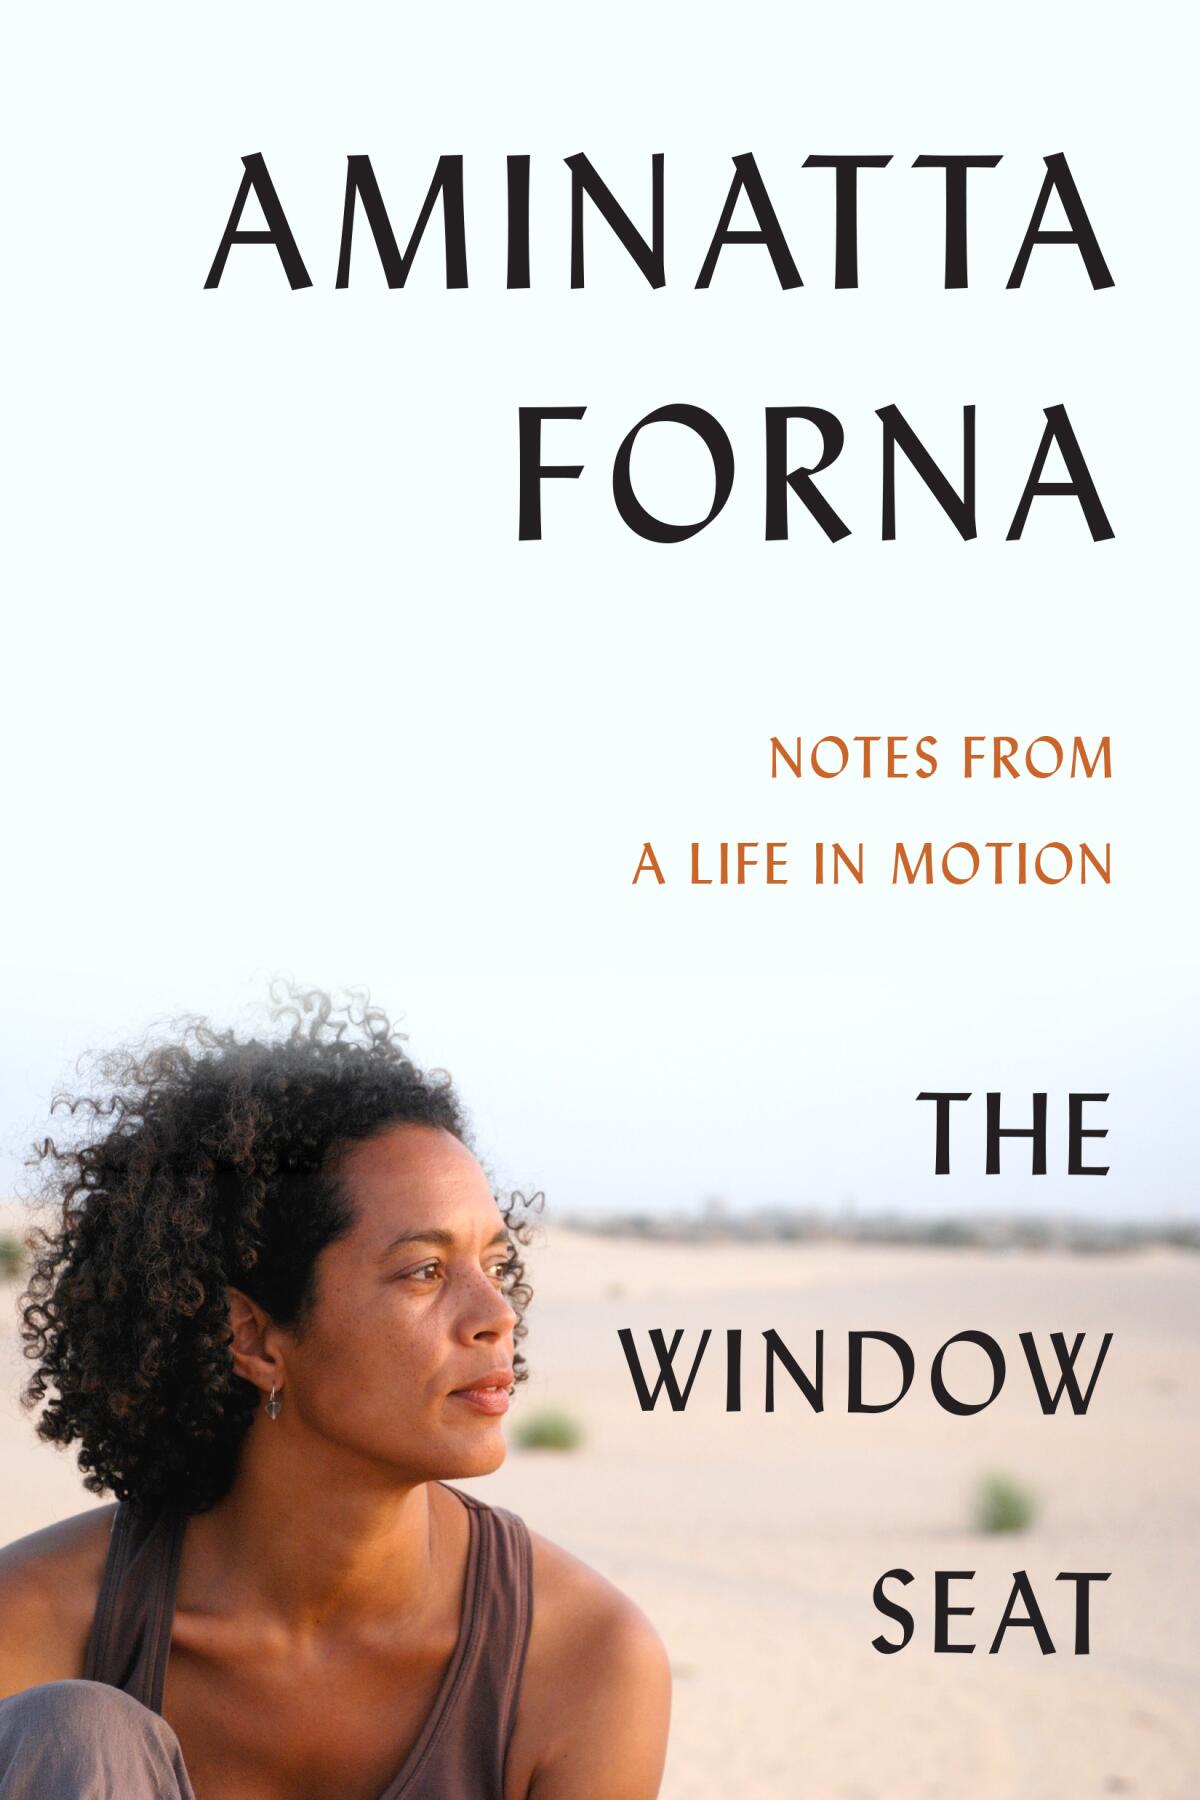 A portrait of a woman graces the book cover for "The Window Seat: Notes From a Life in Motion," by Aminatta Forna